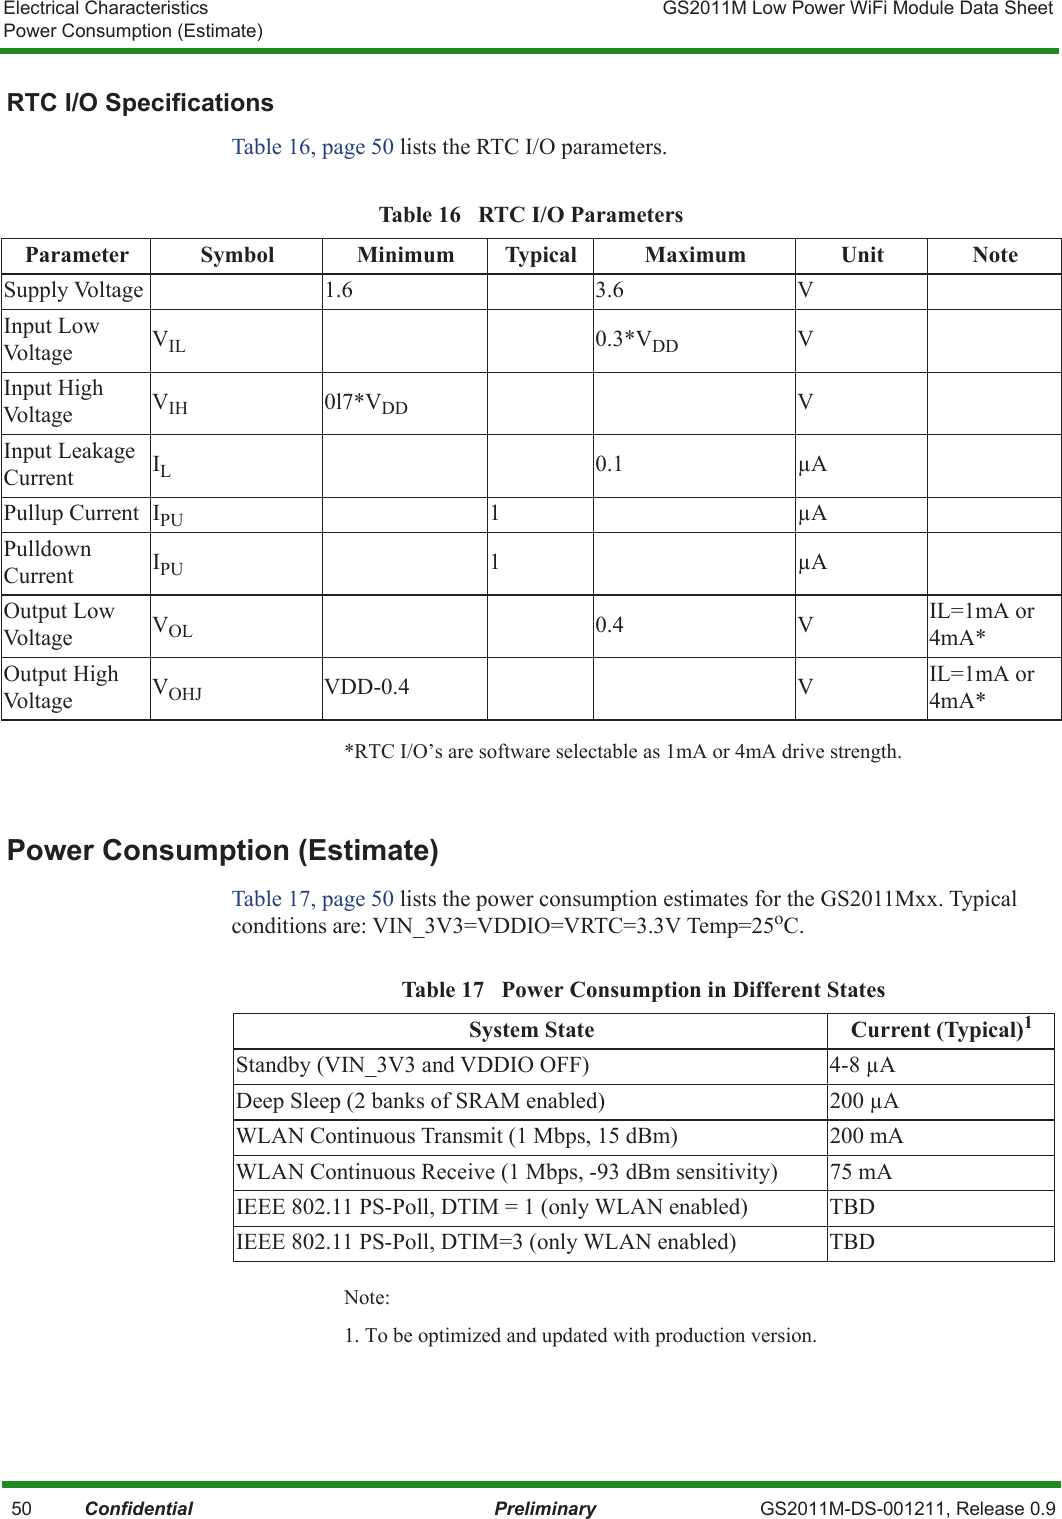 Electrical Characteristics GS2011M Low Power WiFi Module Data SheetPower Consumption (Estimate)   50          Confidential Preliminary GS2011M-DS-001211, Release 0.9RTC I/O SpecificationsTable 16, page 50 lists the RTC I/O parameters.*RTC I/O’s are software selectable as 1mA or 4mA drive strength.Power Consumption (Estimate)Table 17, page 50 lists the power consumption estimates for the GS2011Mxx. Typical conditions are: VIN_3V3=VDDIO=VRTC=3.3V Temp=25oC.Note:1. To be optimized and updated with production version.Table 16   RTC I/O ParametersParameter Symbol Minimum Typical Maximum Unit NoteSupply Voltage 1.6 3.6 VInput Low Voltage VIL 0.3*VDD VInput High Voltage VIH 0l7*VDD VInput Leakage Current IL0.1 μAPullup Current IPU 1μAPulldown Current IPU 1μAOutput Low Voltage VOL 0.4 V IL=1mA or 4mA*Output High Voltage VOHJ VDD-0.4 V IL=1mA or 4mA*Table 17   Power Consumption in Different StatesSystem State Current (Typical)1Standby (VIN_3V3 and VDDIO OFF) 4-8 μADeep Sleep (2 banks of SRAM enabled) 200 μAWLAN Continuous Transmit (1 Mbps, 15 dBm) 200 mAWLAN Continuous Receive (1 Mbps, -93 dBm sensitivity) 75 mAIEEE 802.11 PS-Poll, DTIM = 1 (only WLAN enabled) TBDIEEE 802.11 PS-Poll, DTIM=3 (only WLAN enabled) TBD